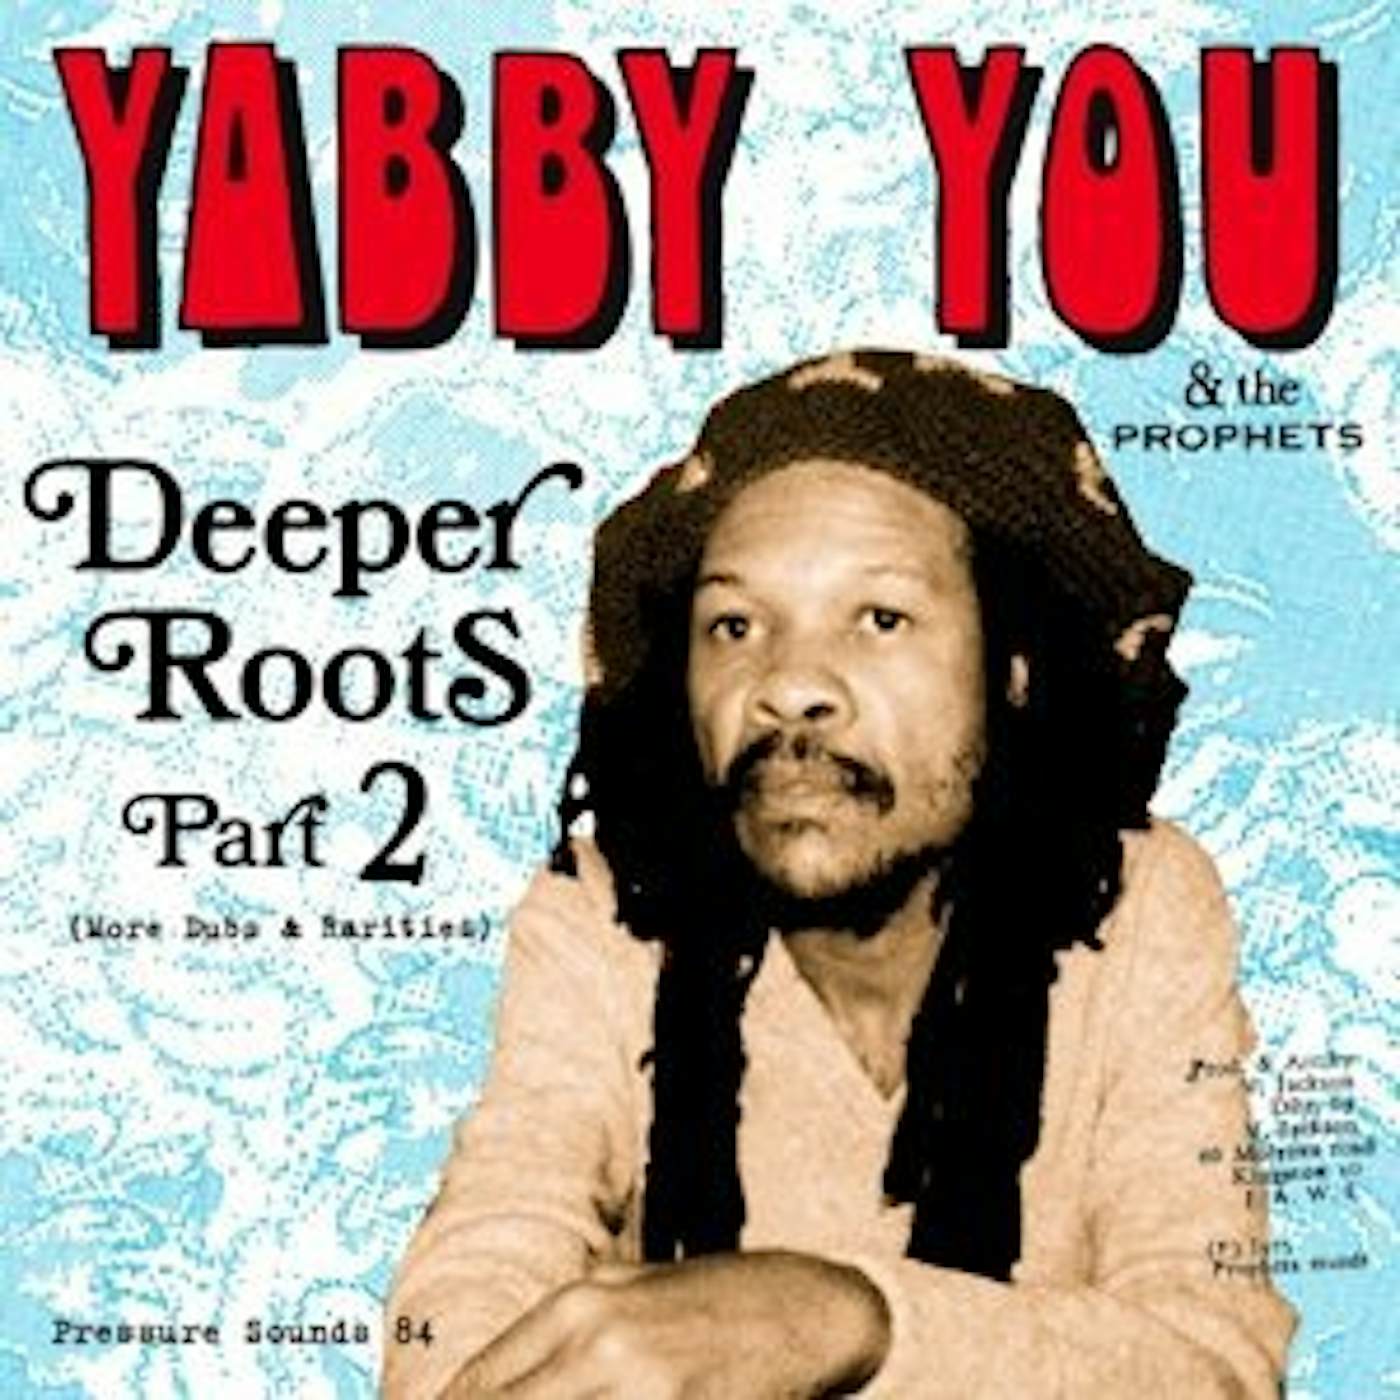 Yabby You DEEPER ROOTS PART 2 Vinyl Record